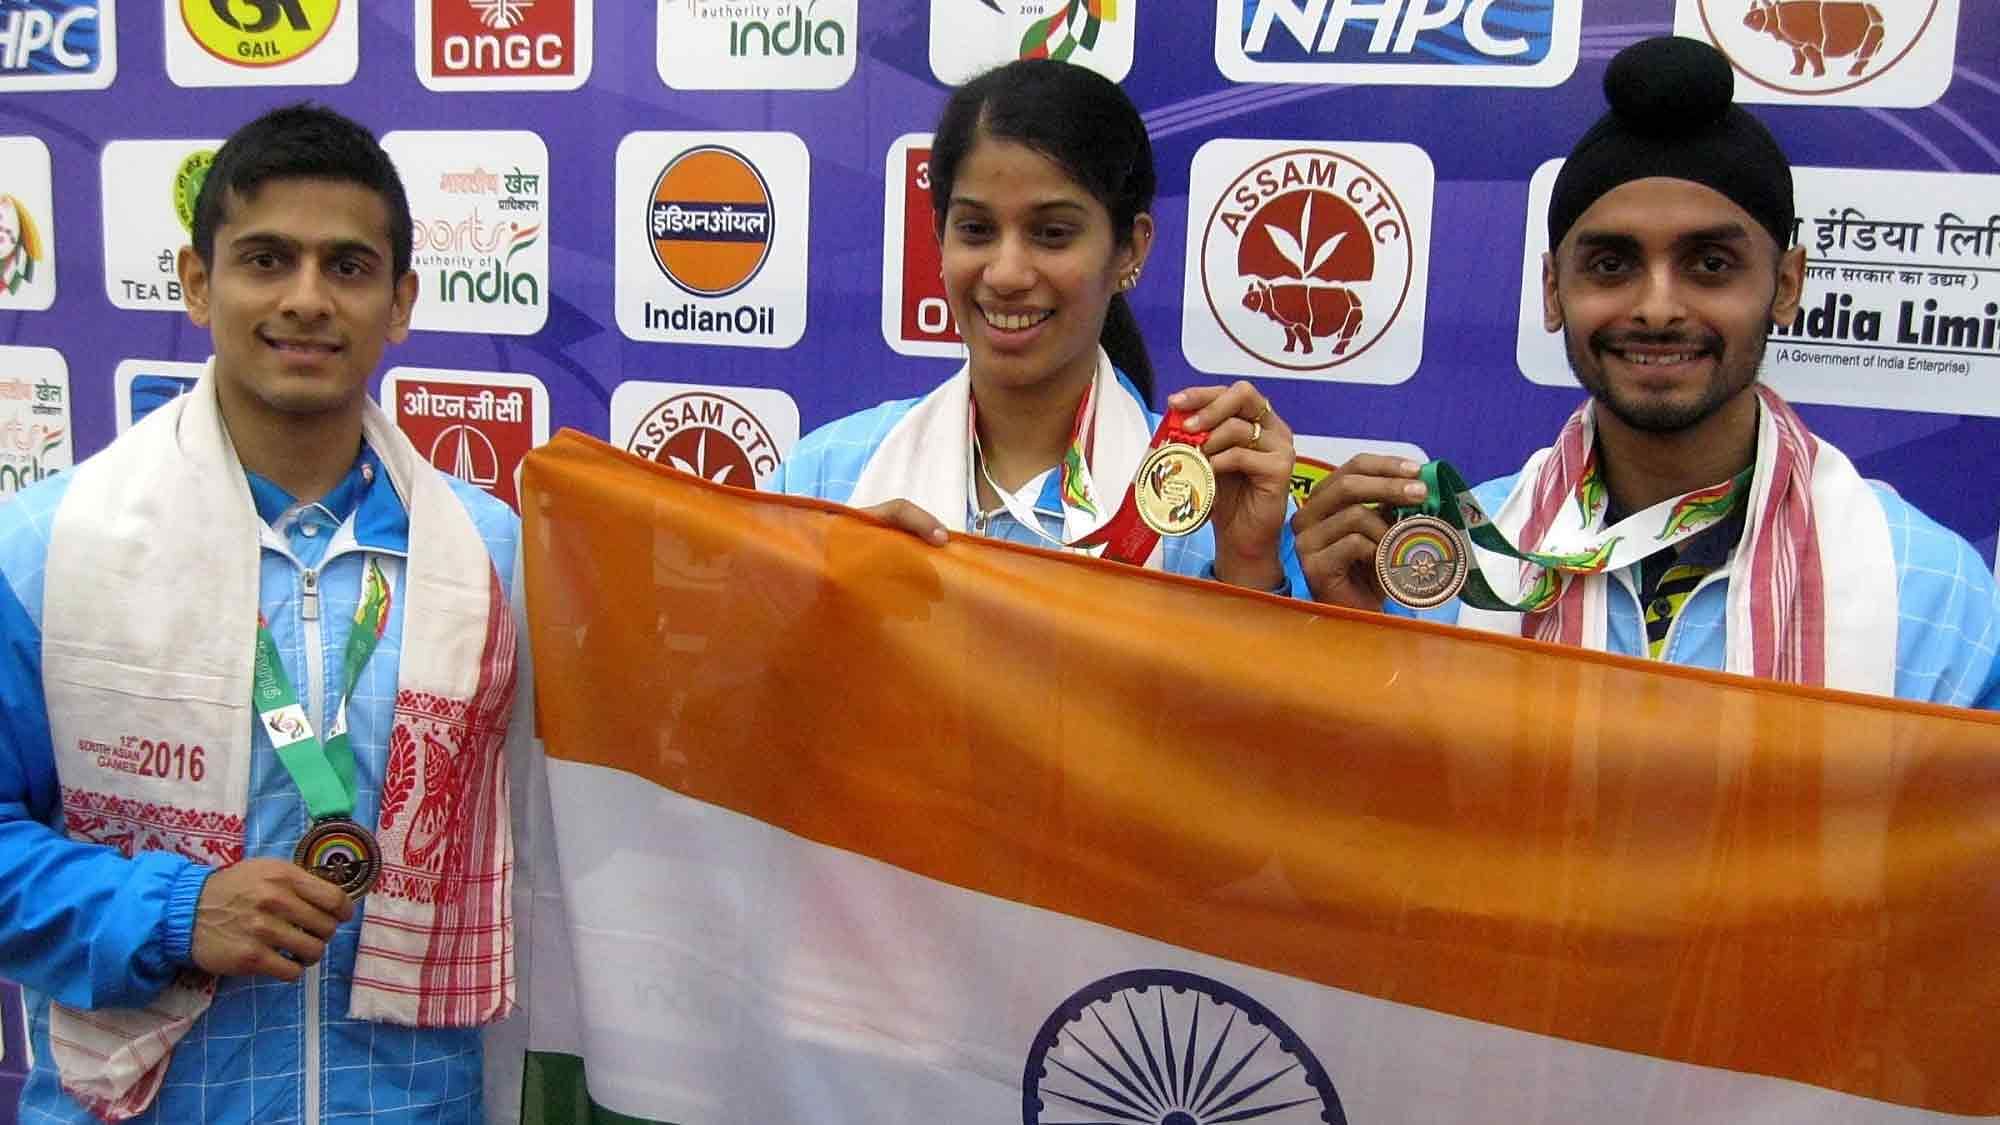 Saurav Ghosal (Bronze), Joshana Chinappa (Gold), Harinder Pal Sandhu (Bronze) stand with their medals  at the 12th South Asian Games. (Photo: IANS)